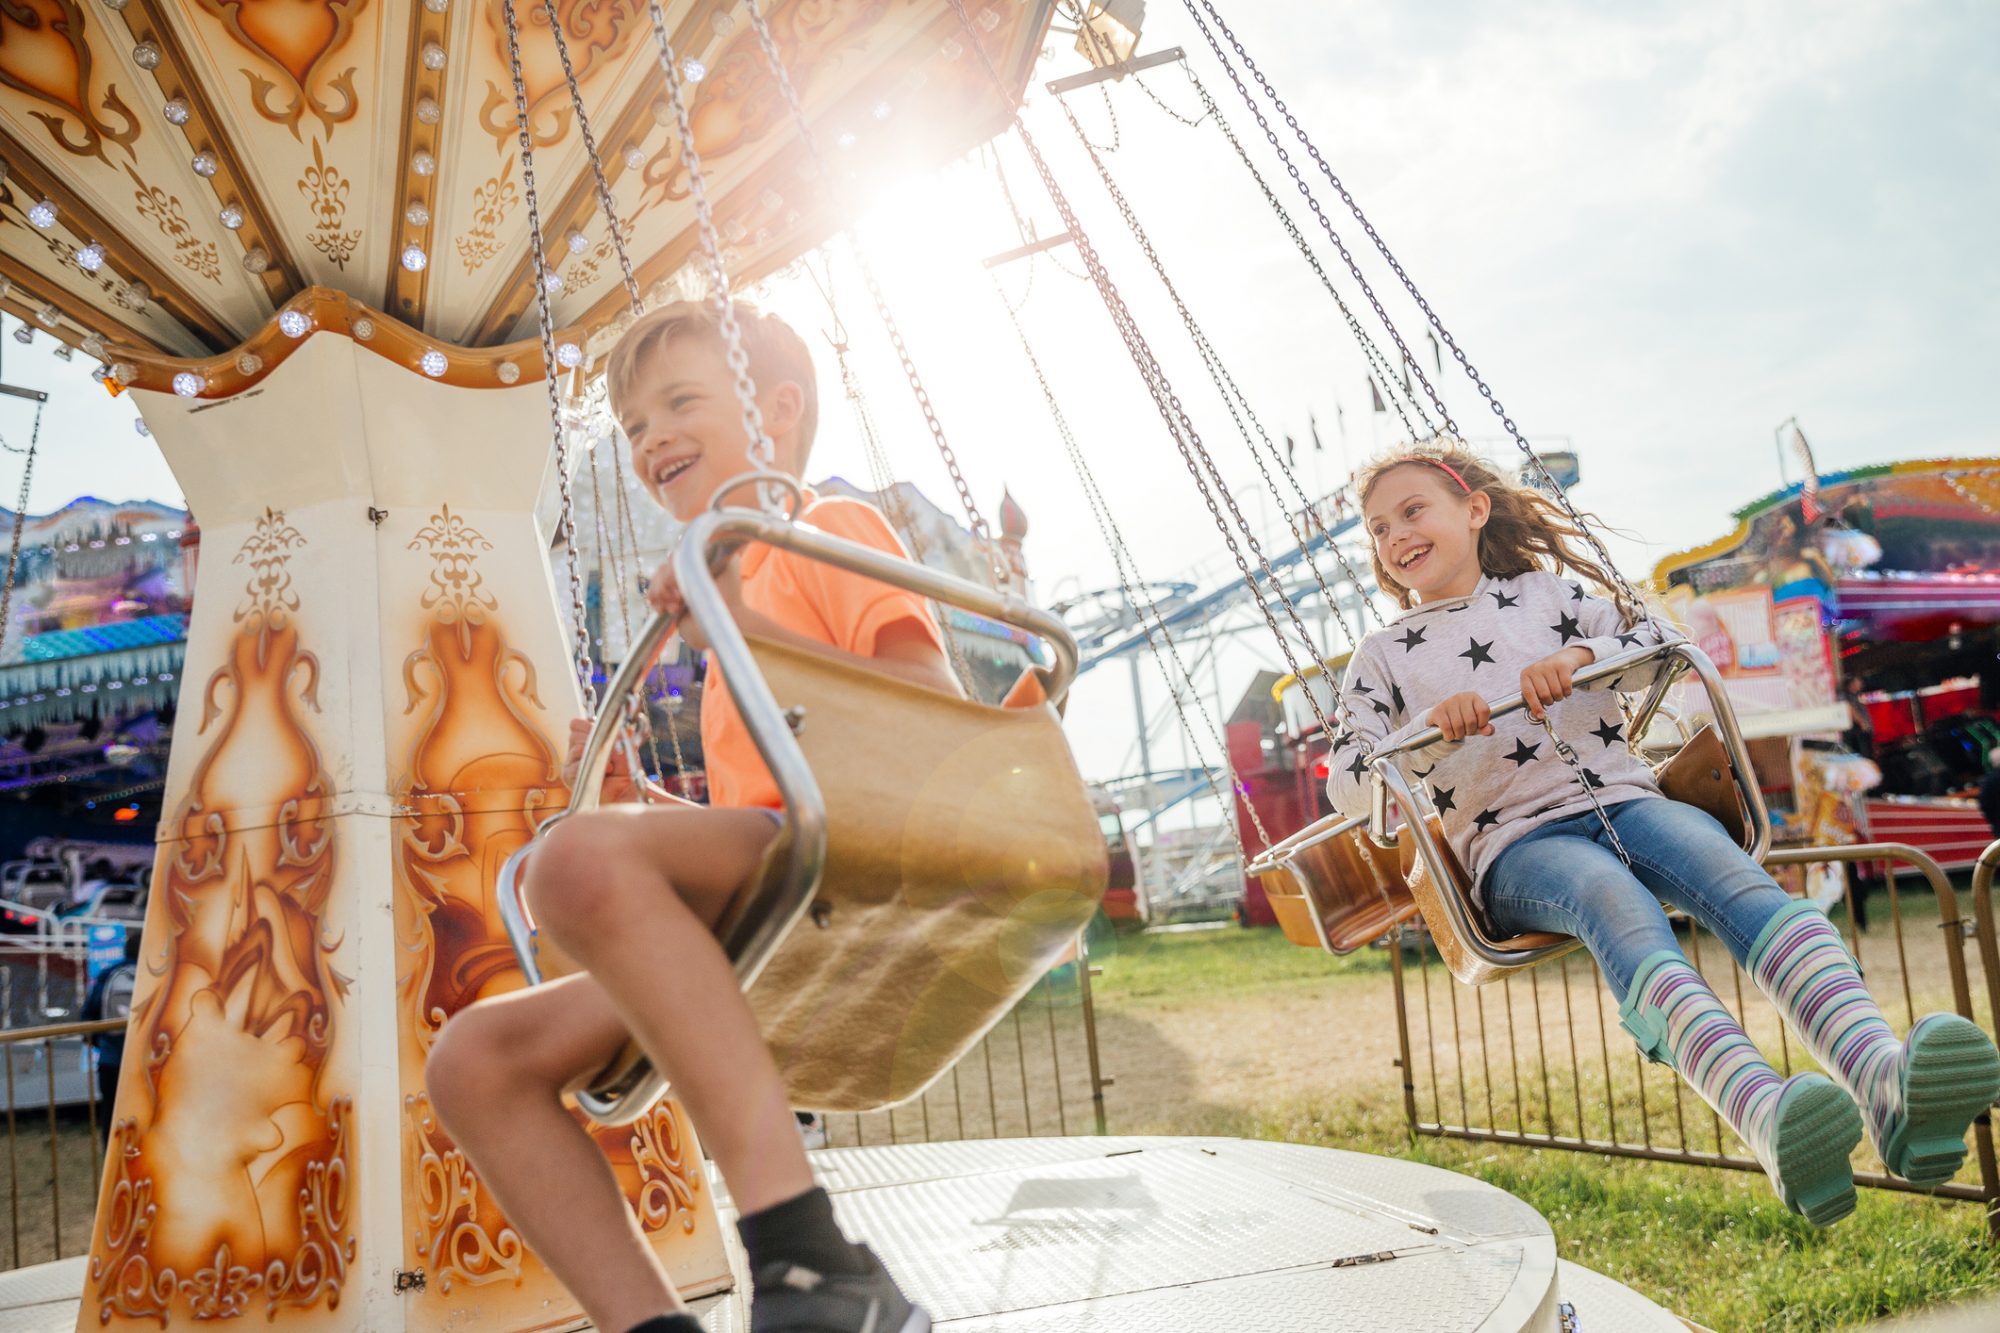 An image of children on a swing ride at an theme park.